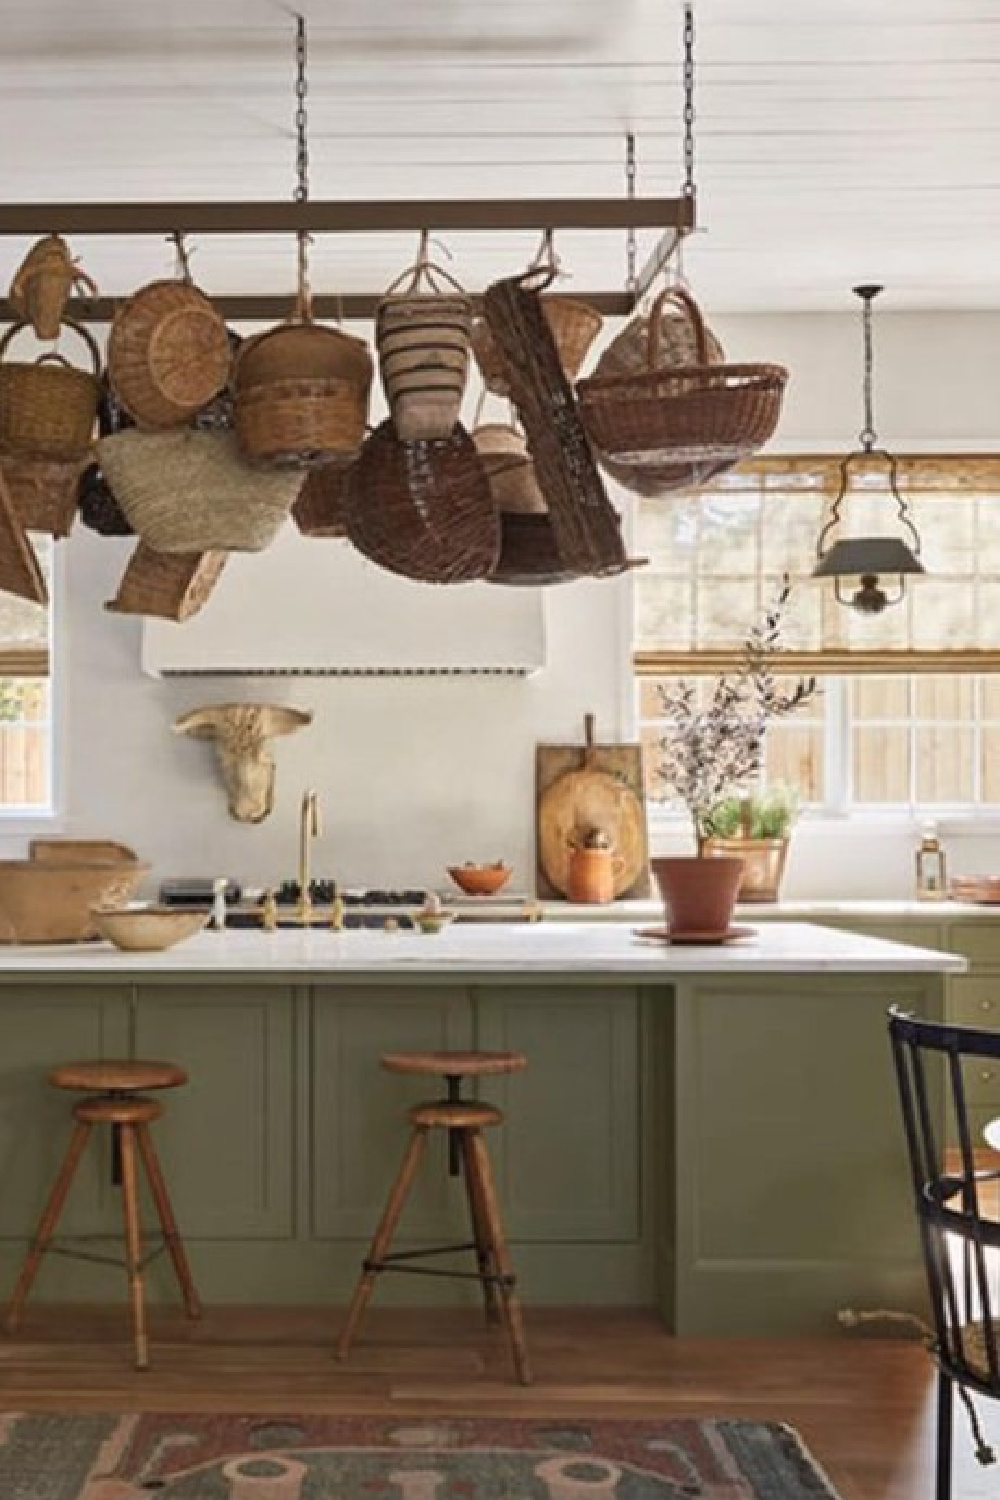 Basket collection over showhouse kitchen island. Timeless interior design by Shannon Bowers with nods to European antiques, patina, understated elegance, and sophisticated simplicity. #shannonbowers #timelessinteriors